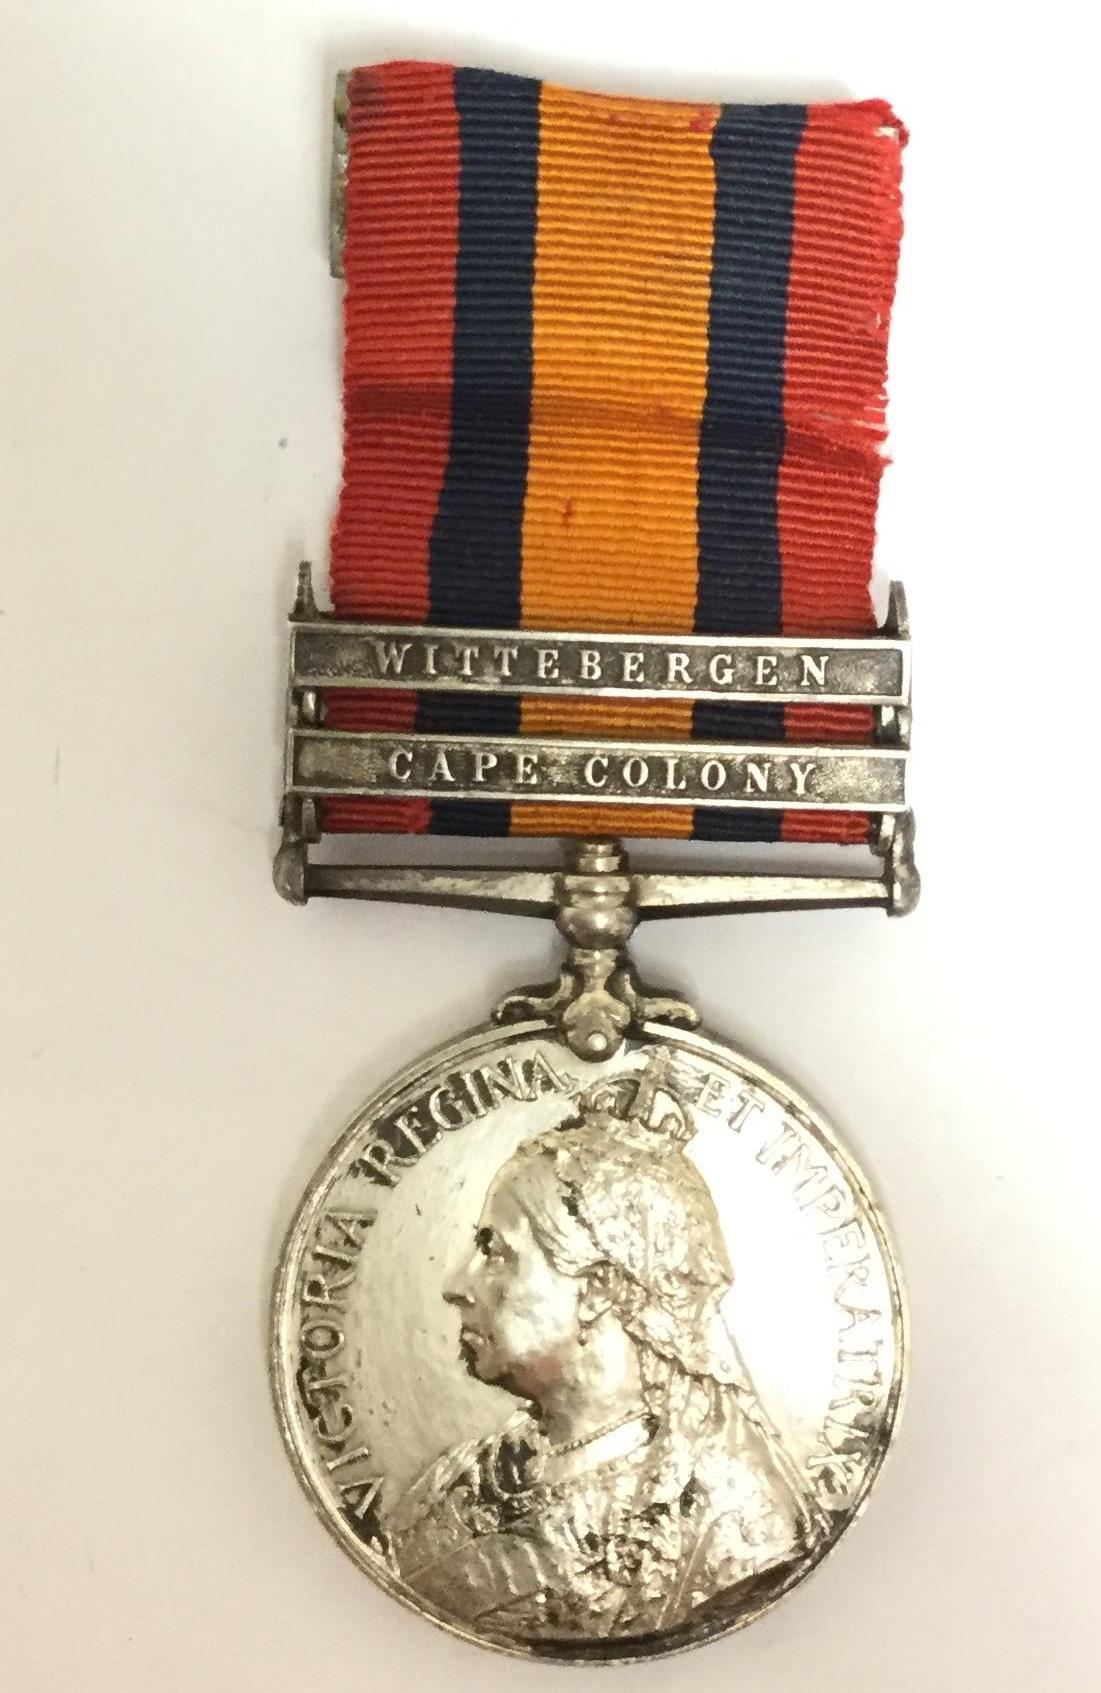 Queen South Africa medal with Wittebergen and Cape Colony Clasps Renamed to 3243 Clp W C Harding, S.